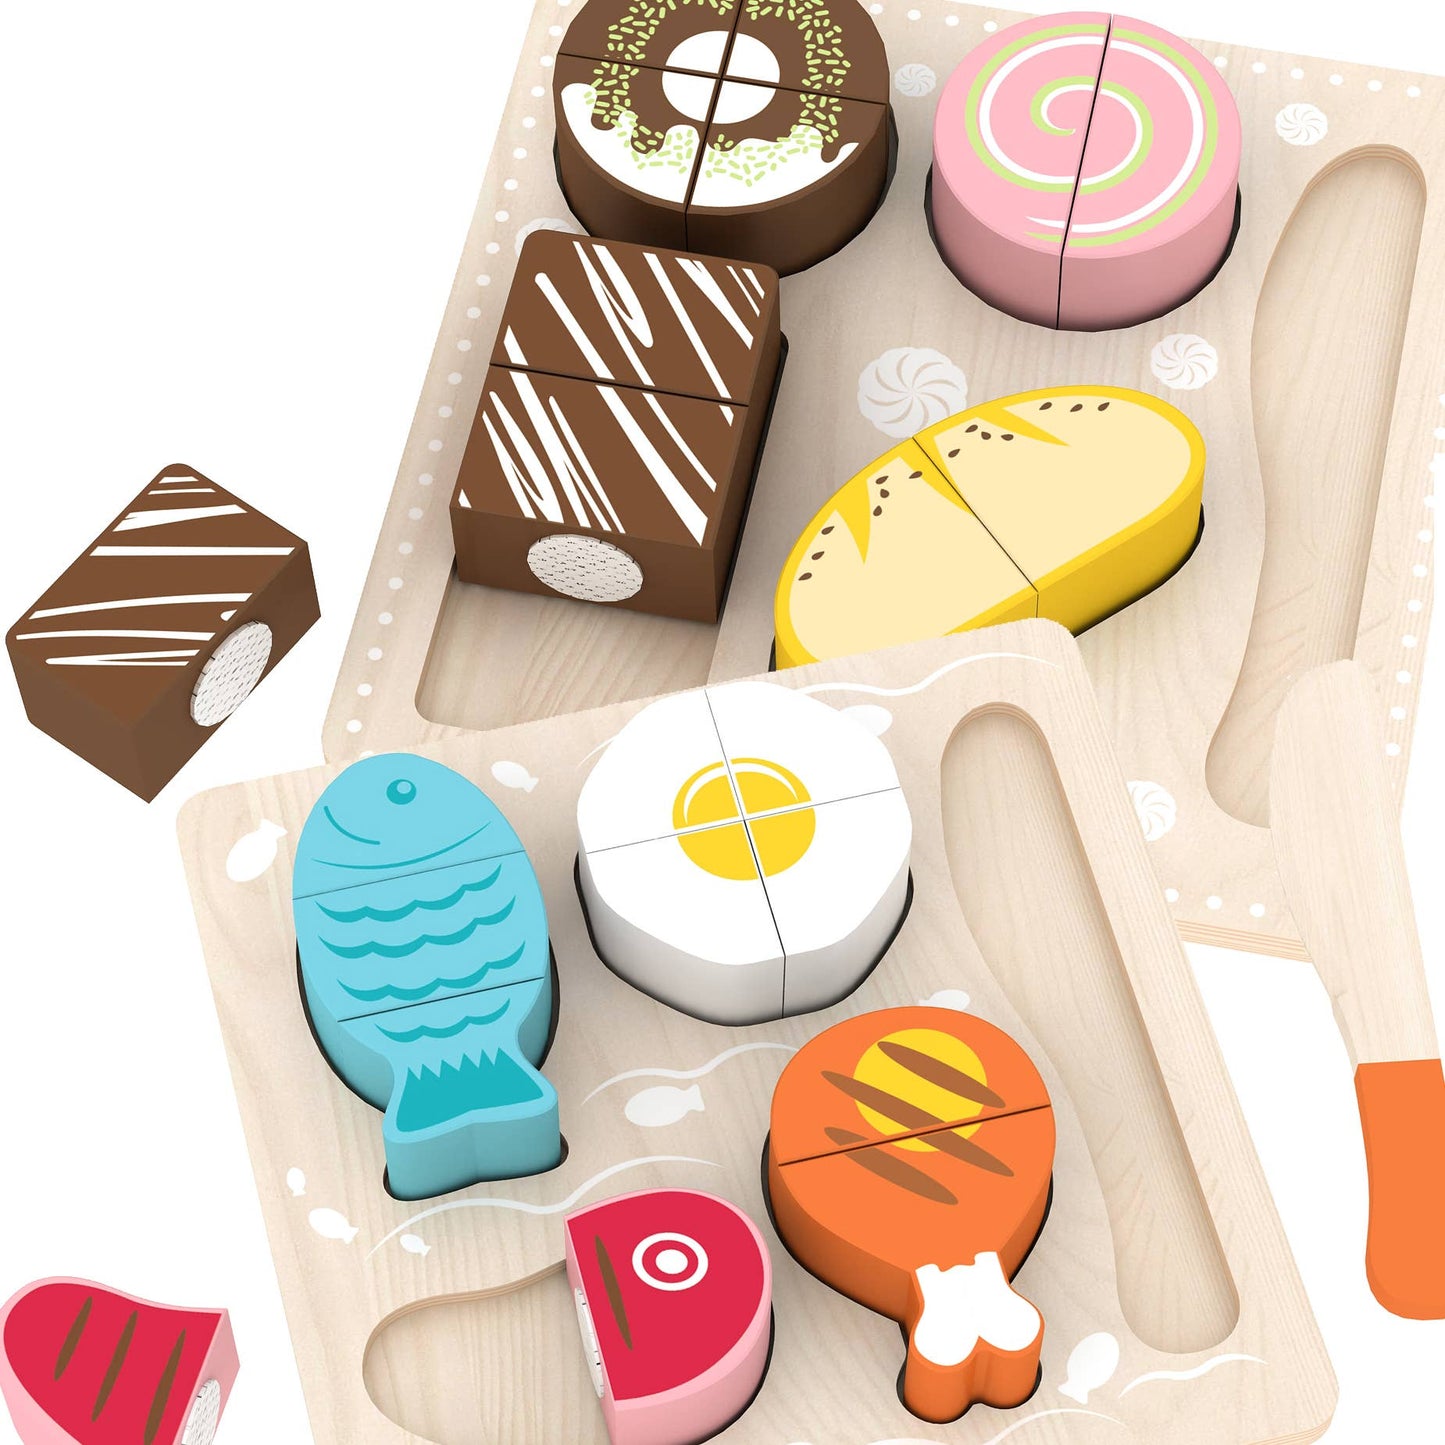 WOODEN PLAY FOOD SETS – DINNER & DESSERT PUZZLE PLAY SET